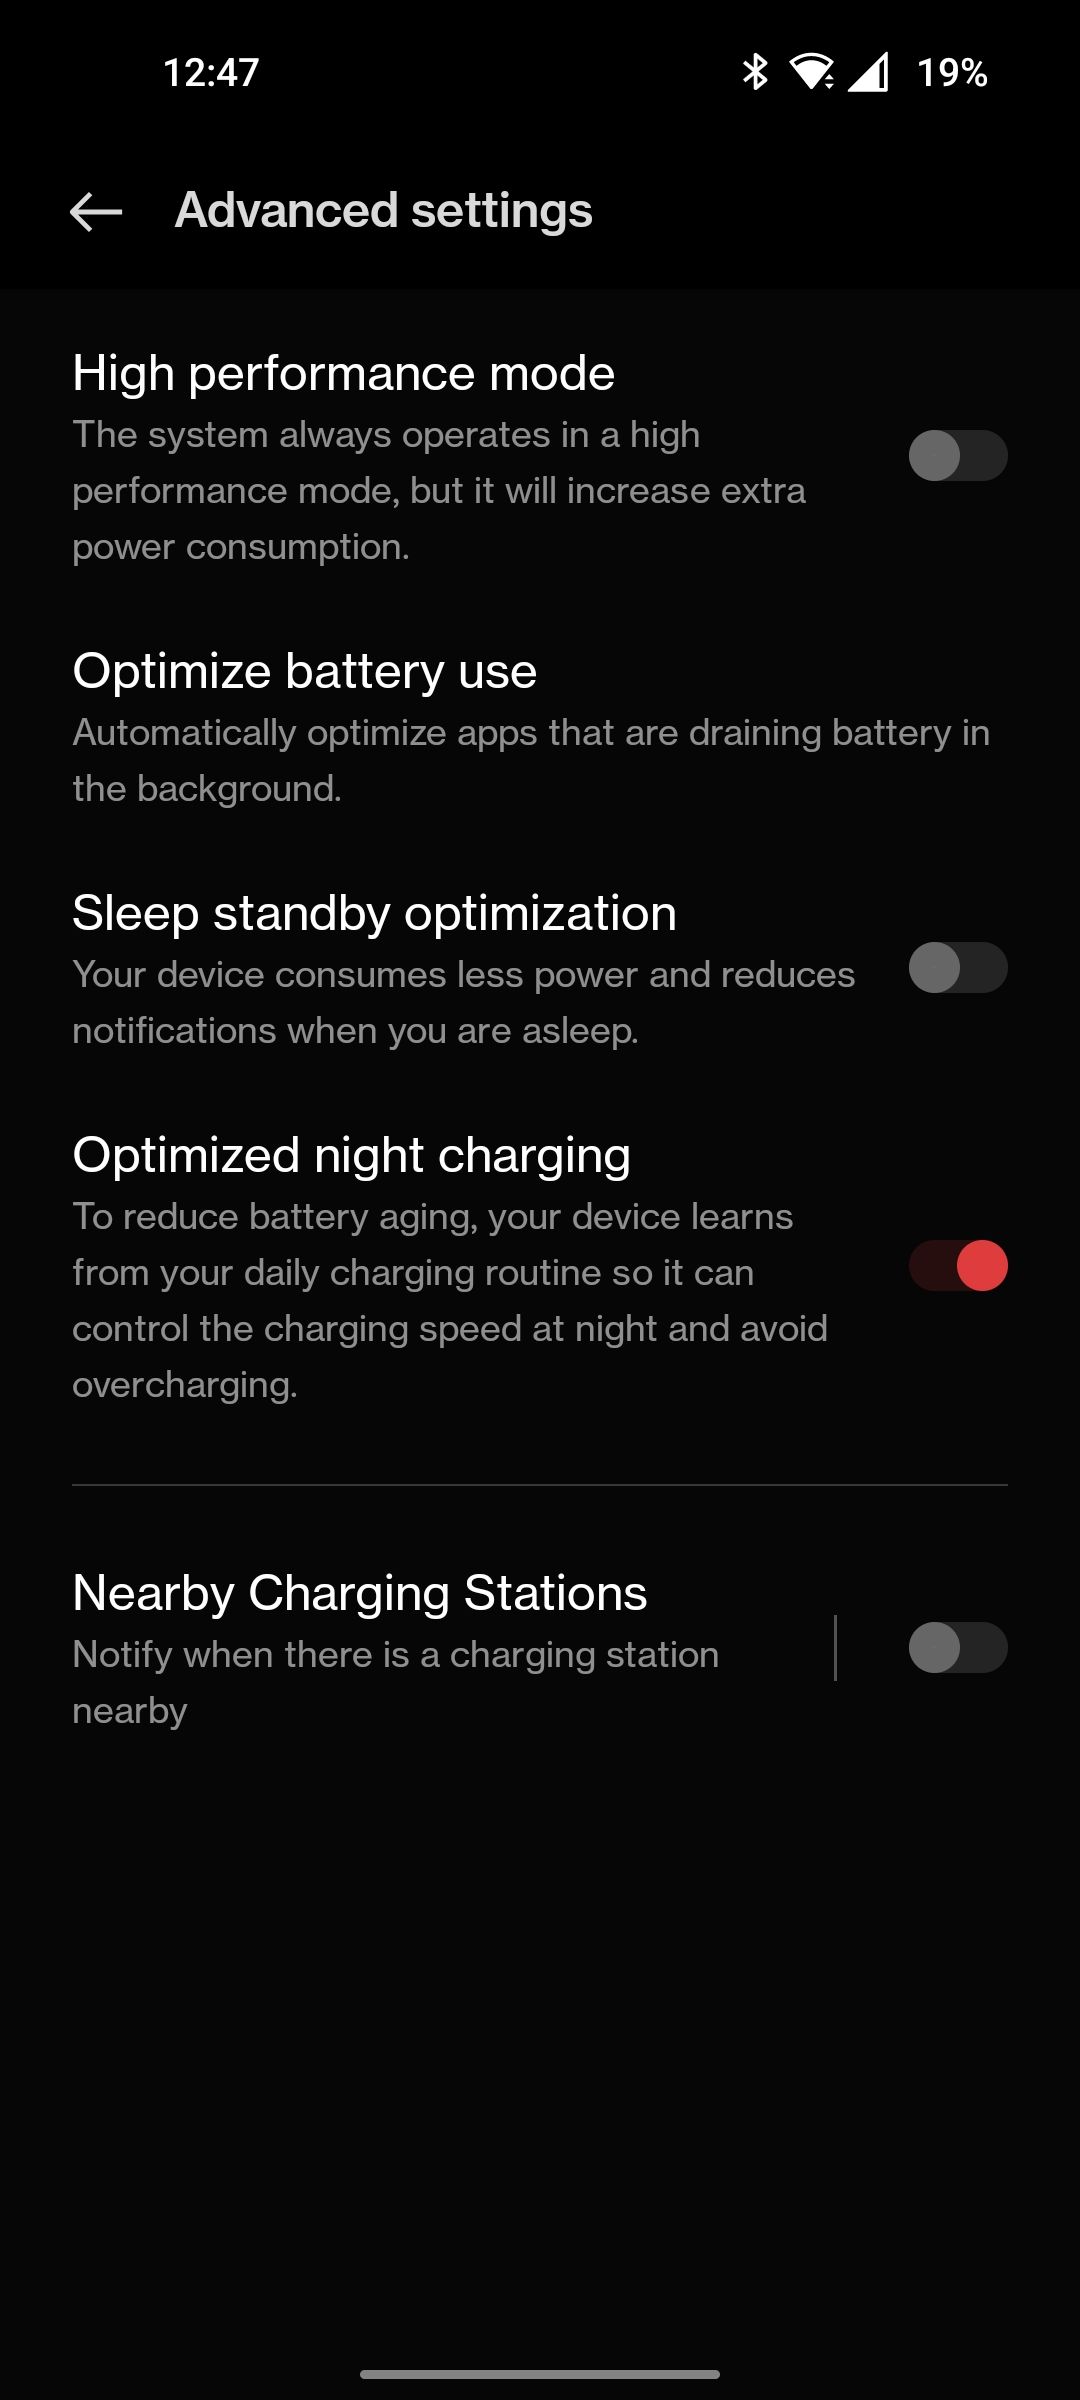 OnePlus battery advanced settings with optimized night charging toggle